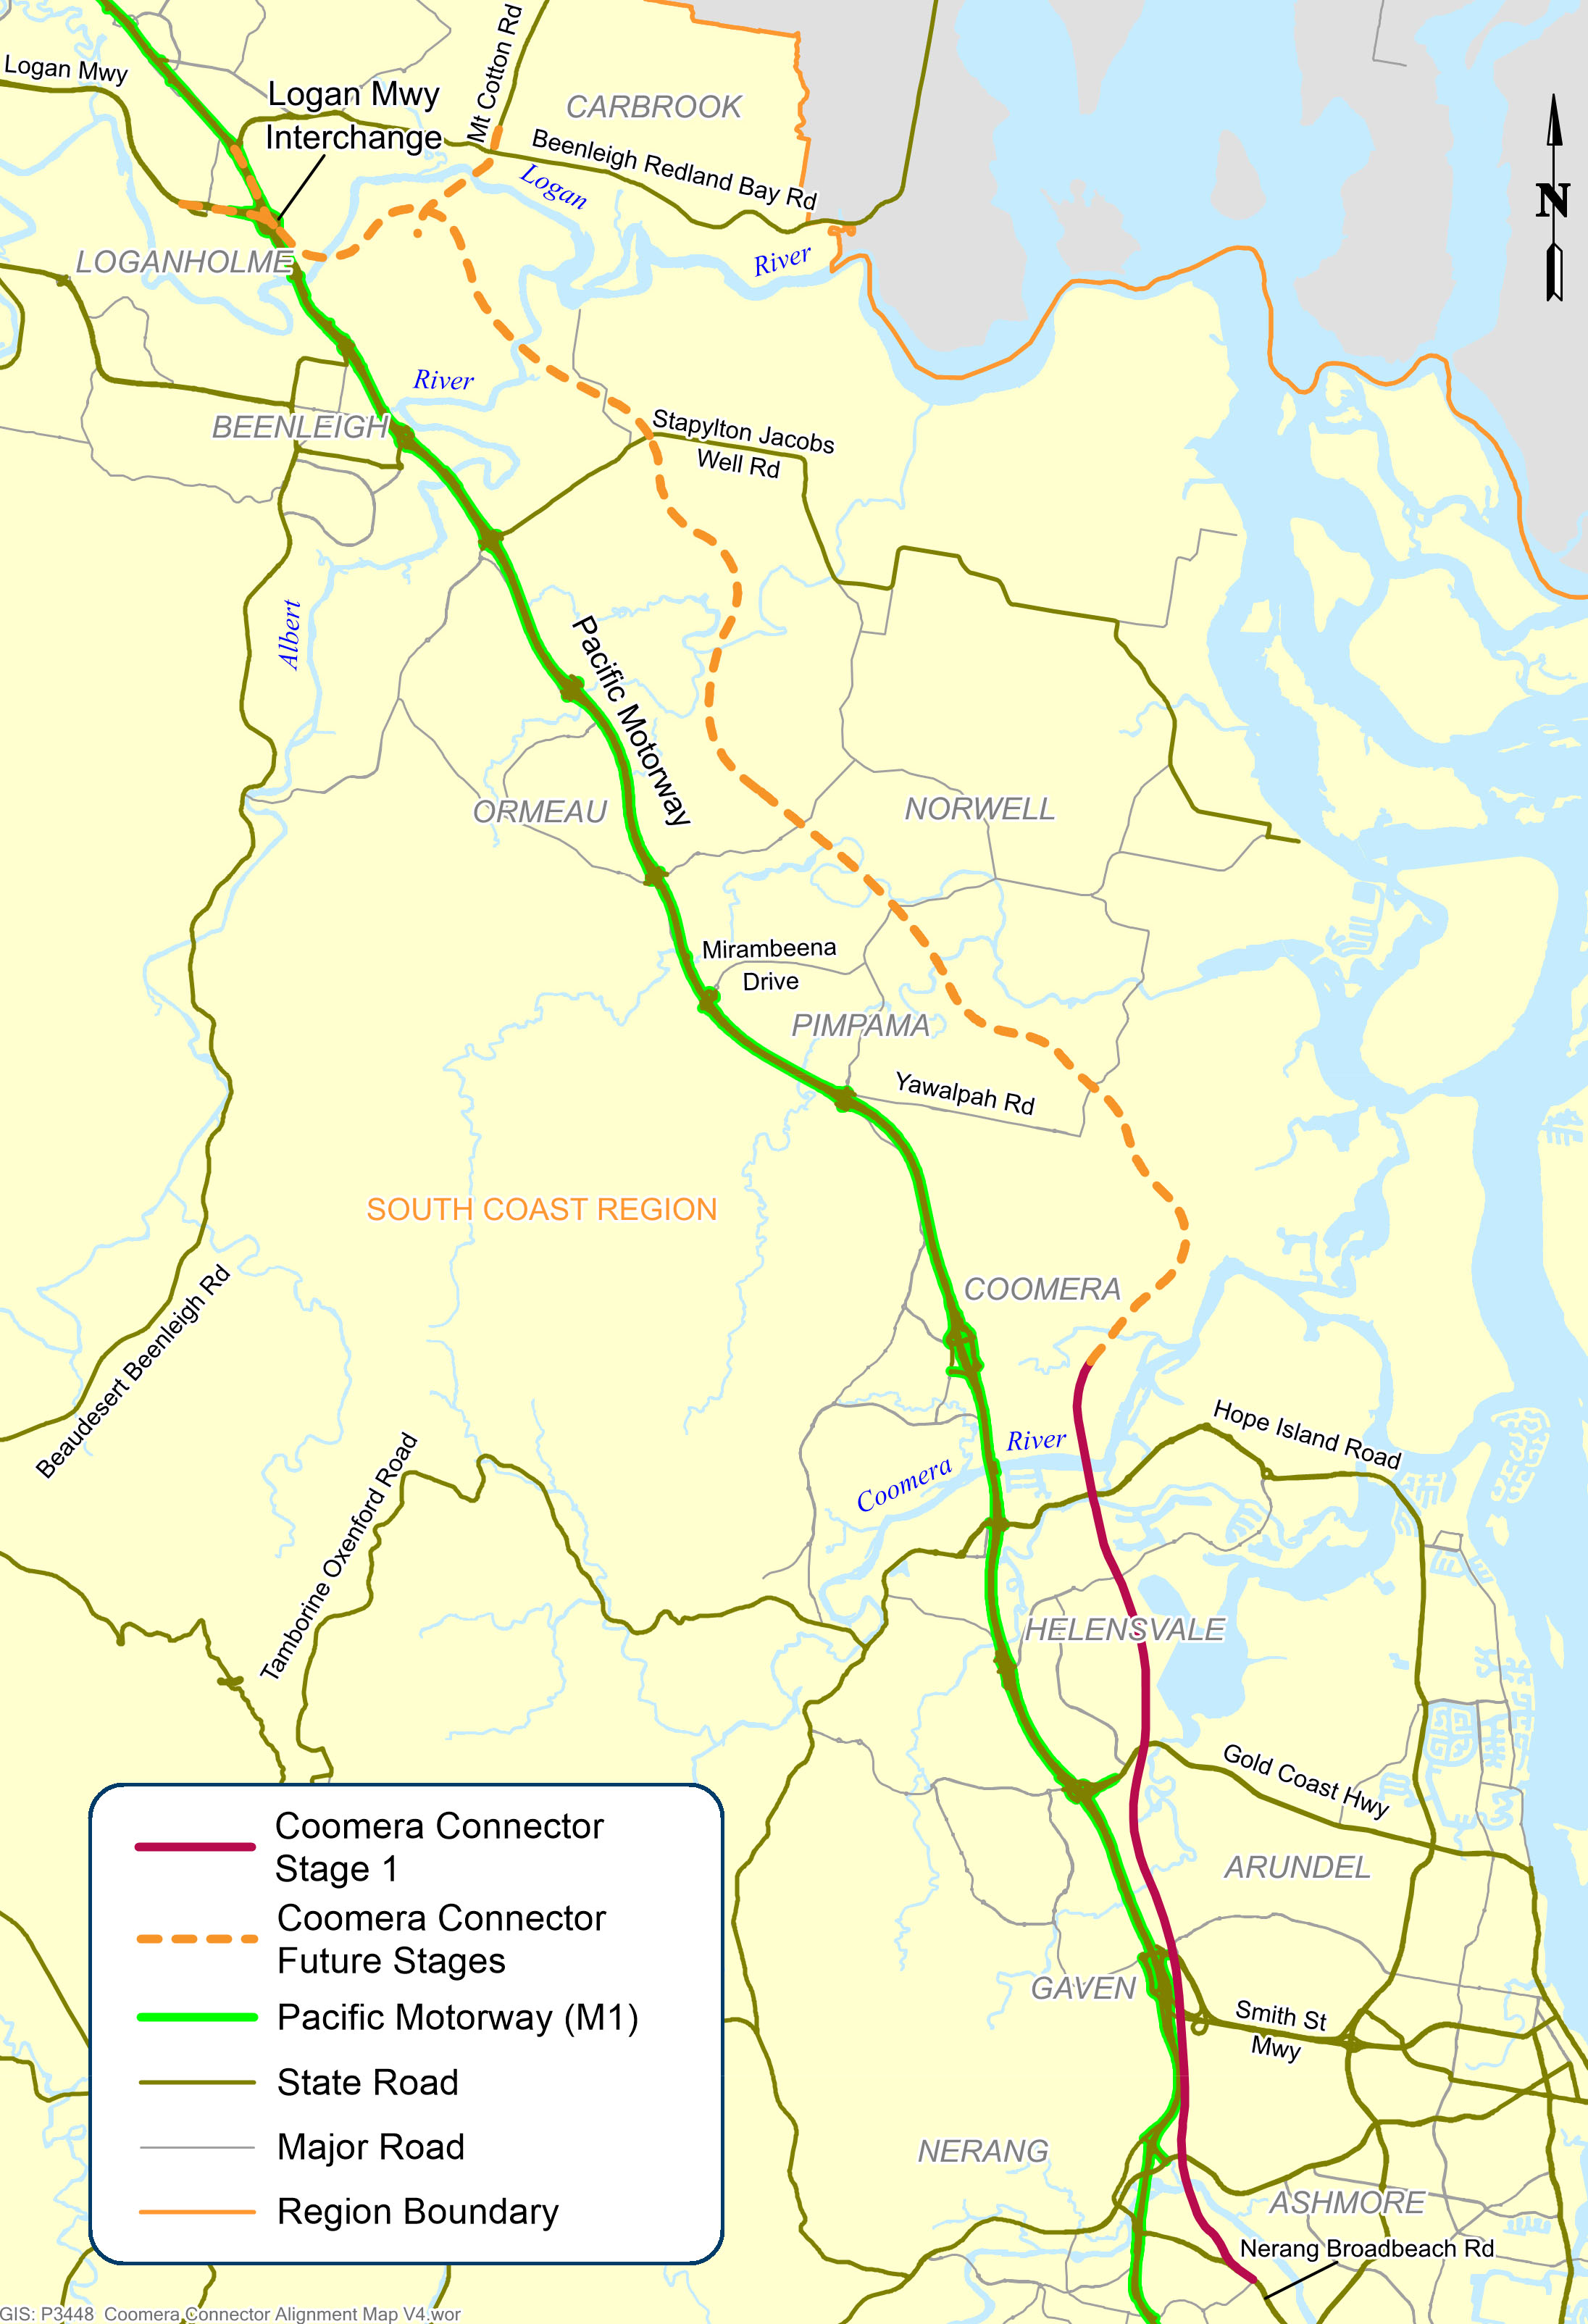 Coomera Connector alignment map